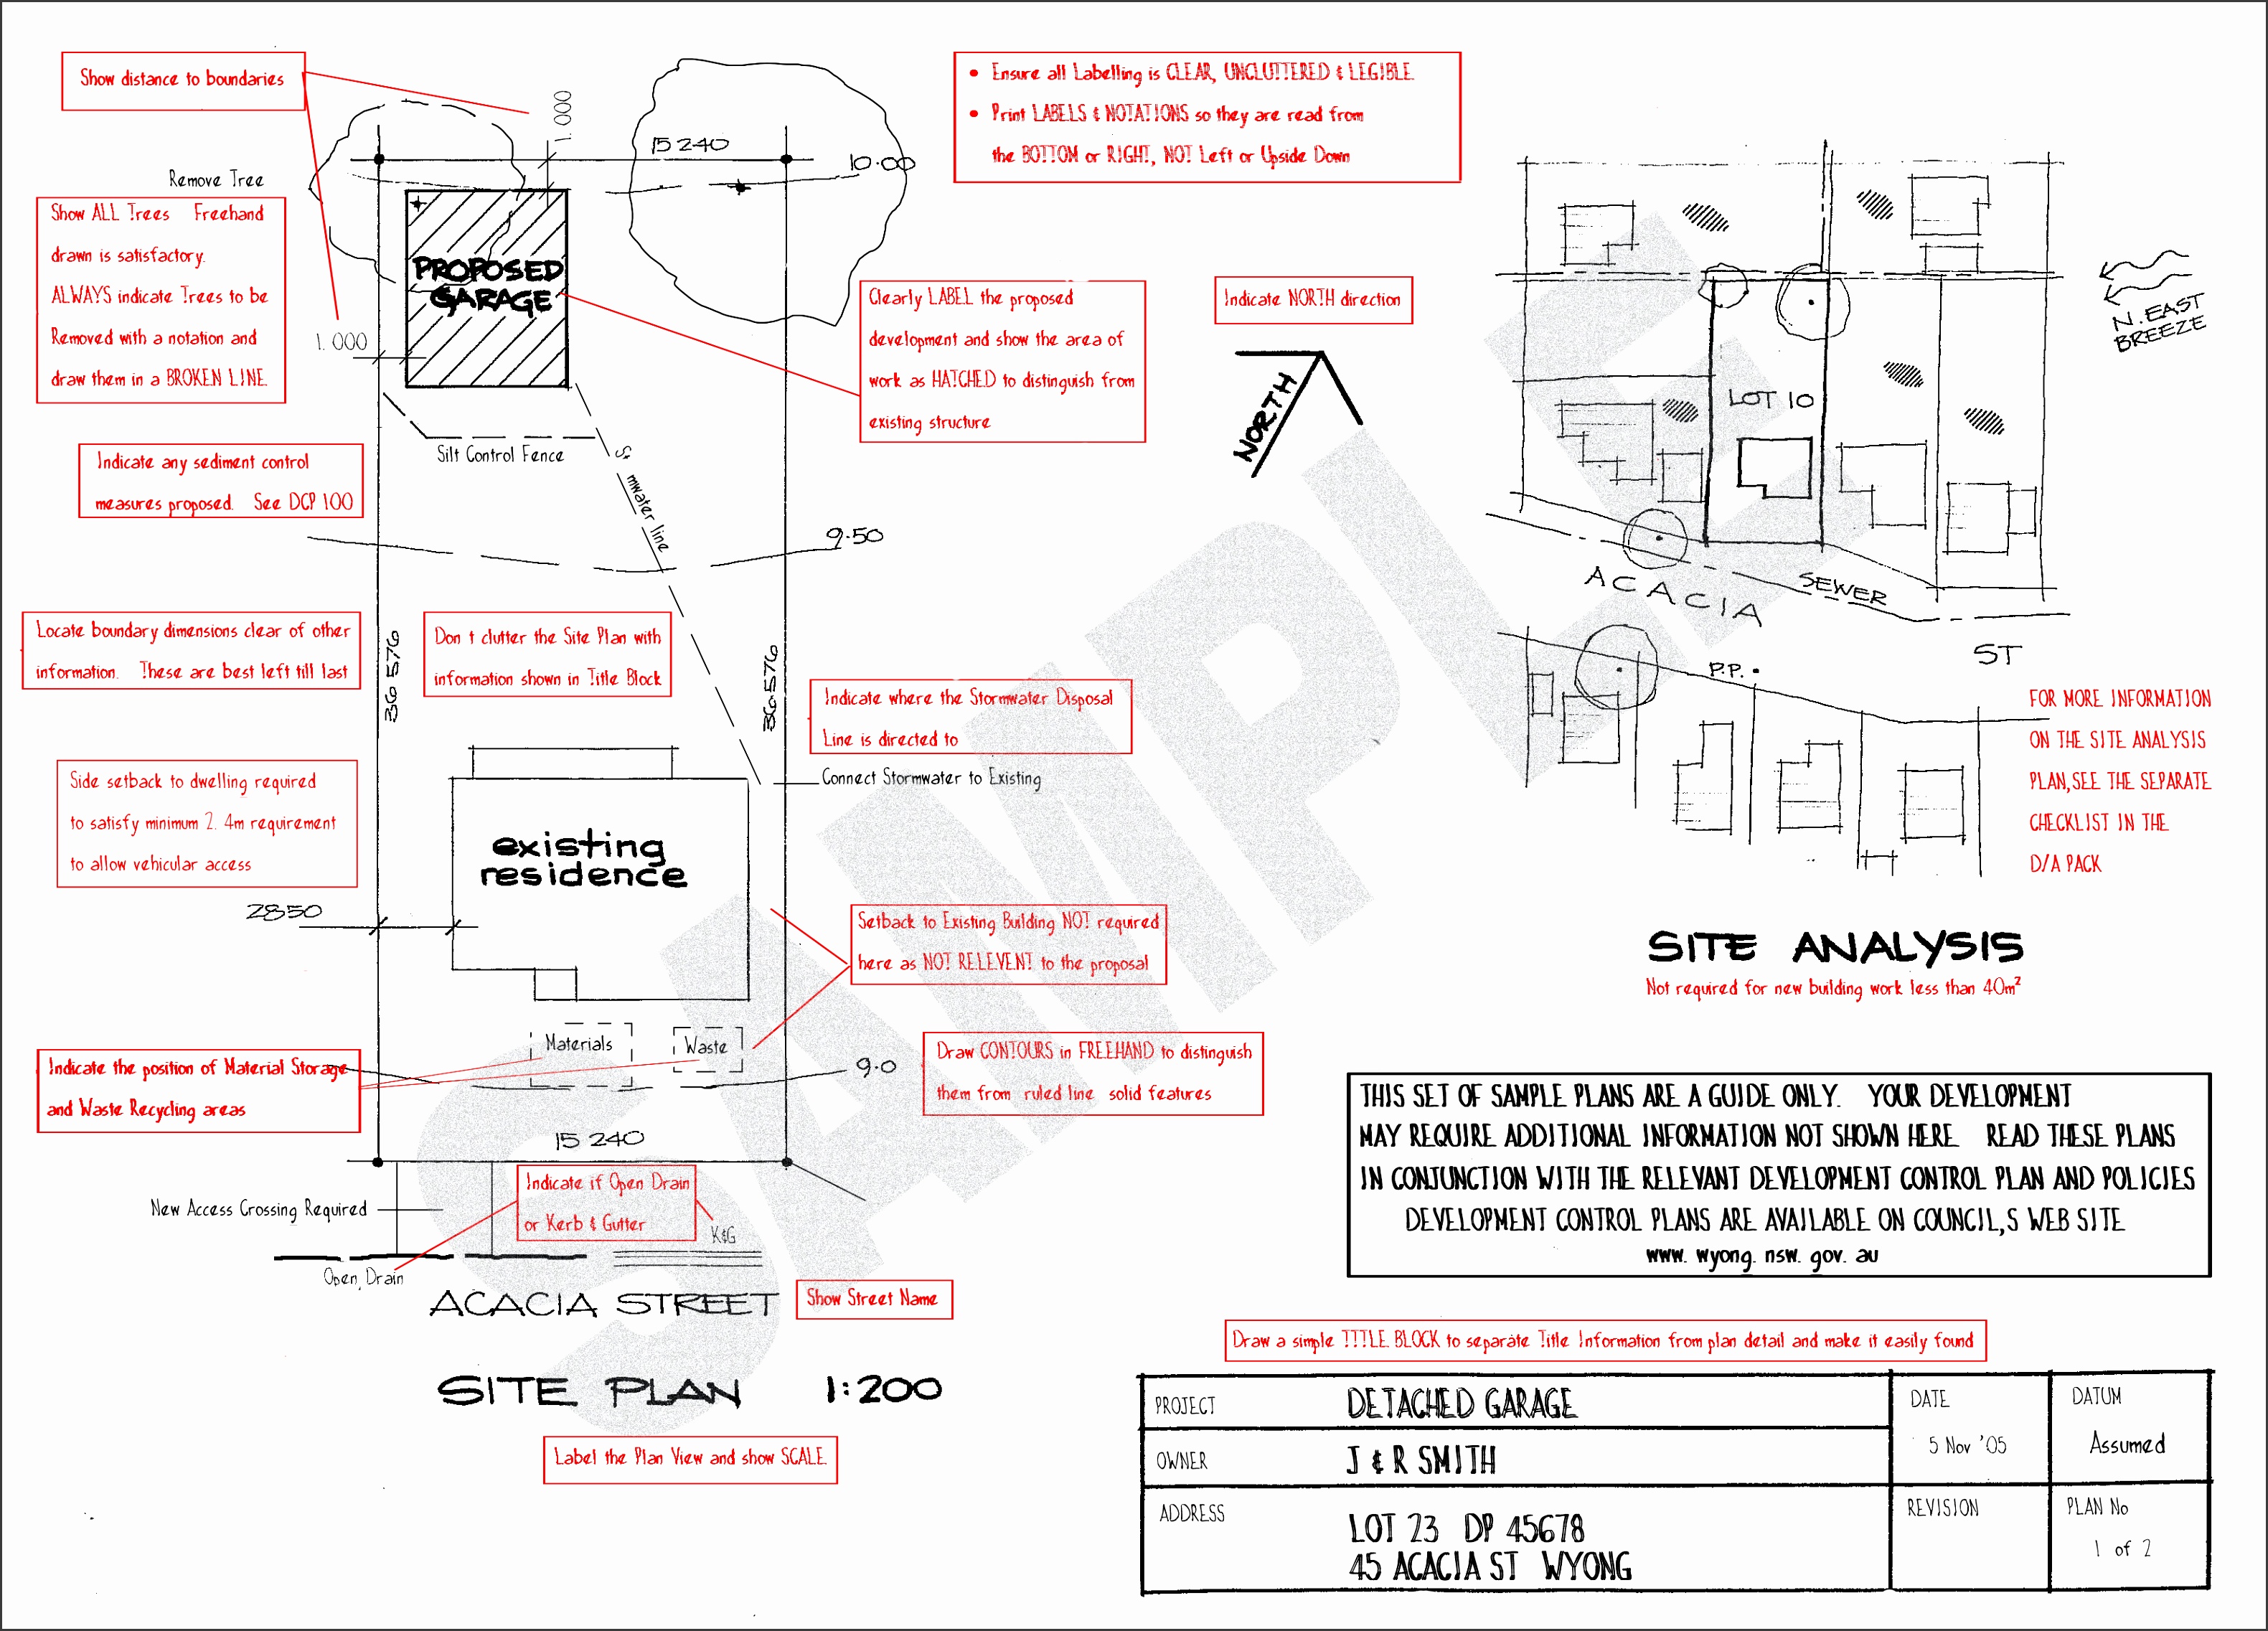 Detached Garage Site Plan and Site Analysis 2 99 MB